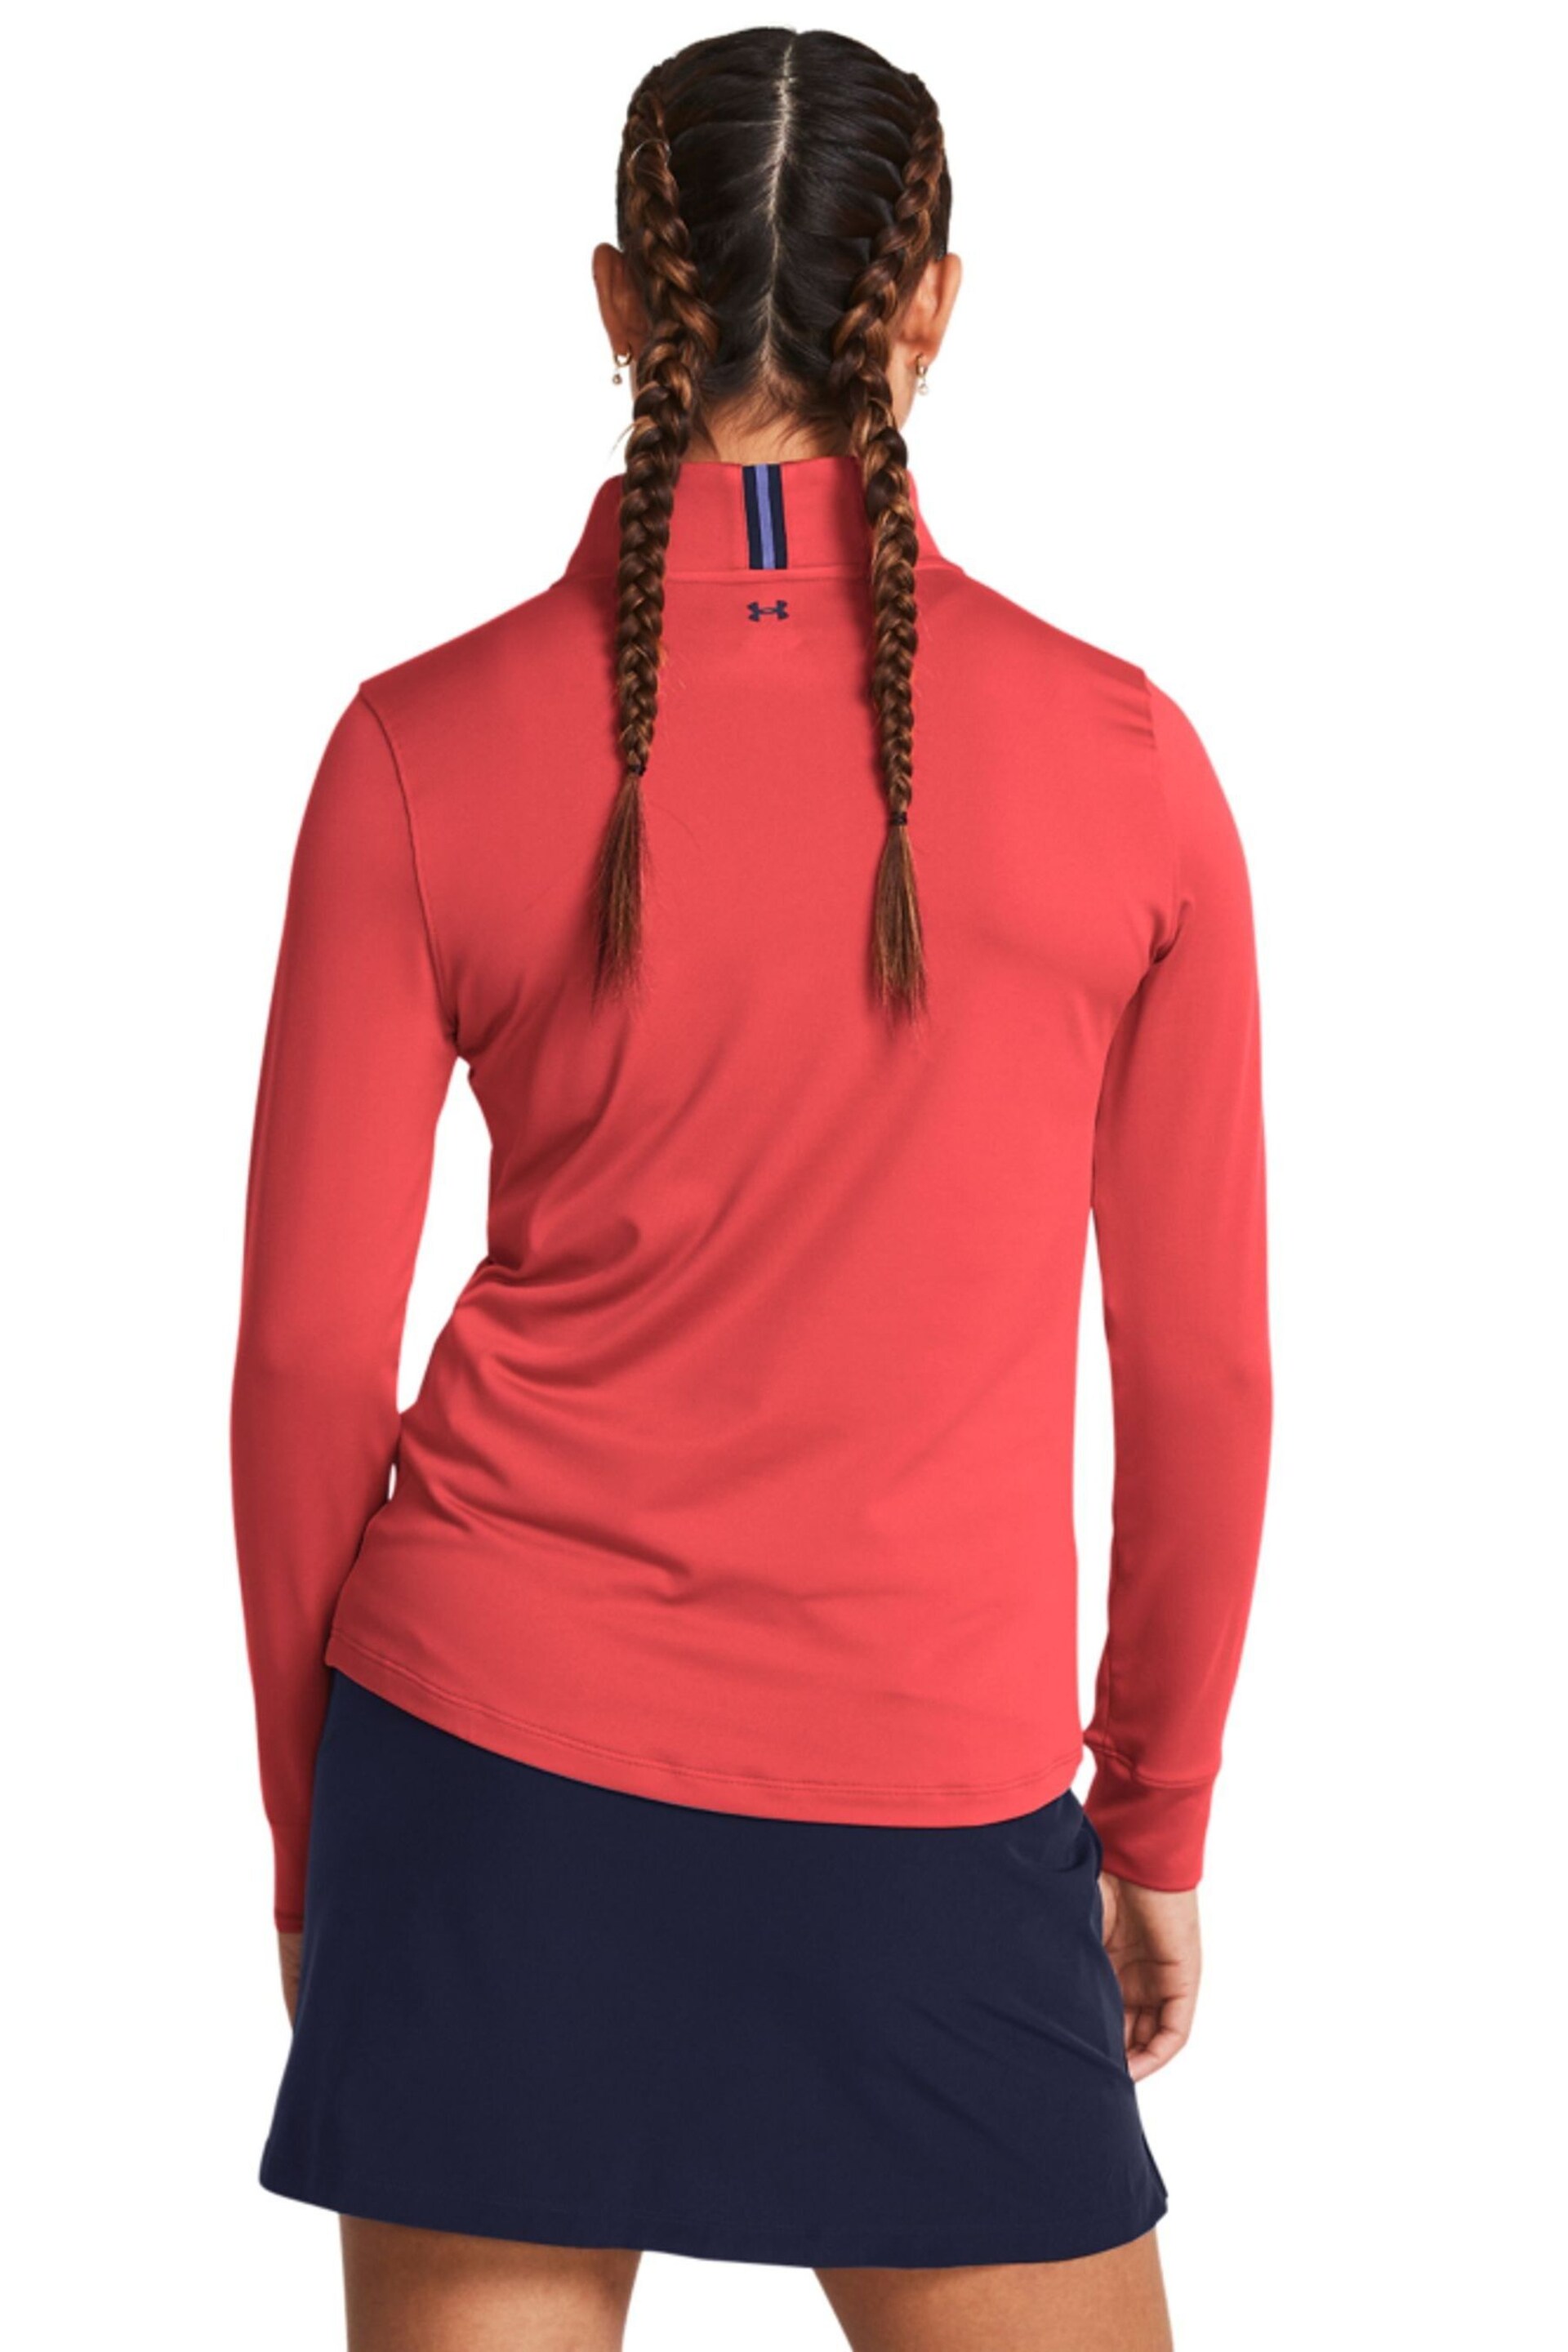 Under Armour Red/Navy Play Off 1/4 Zip Sweat Top - Image 2 of 5